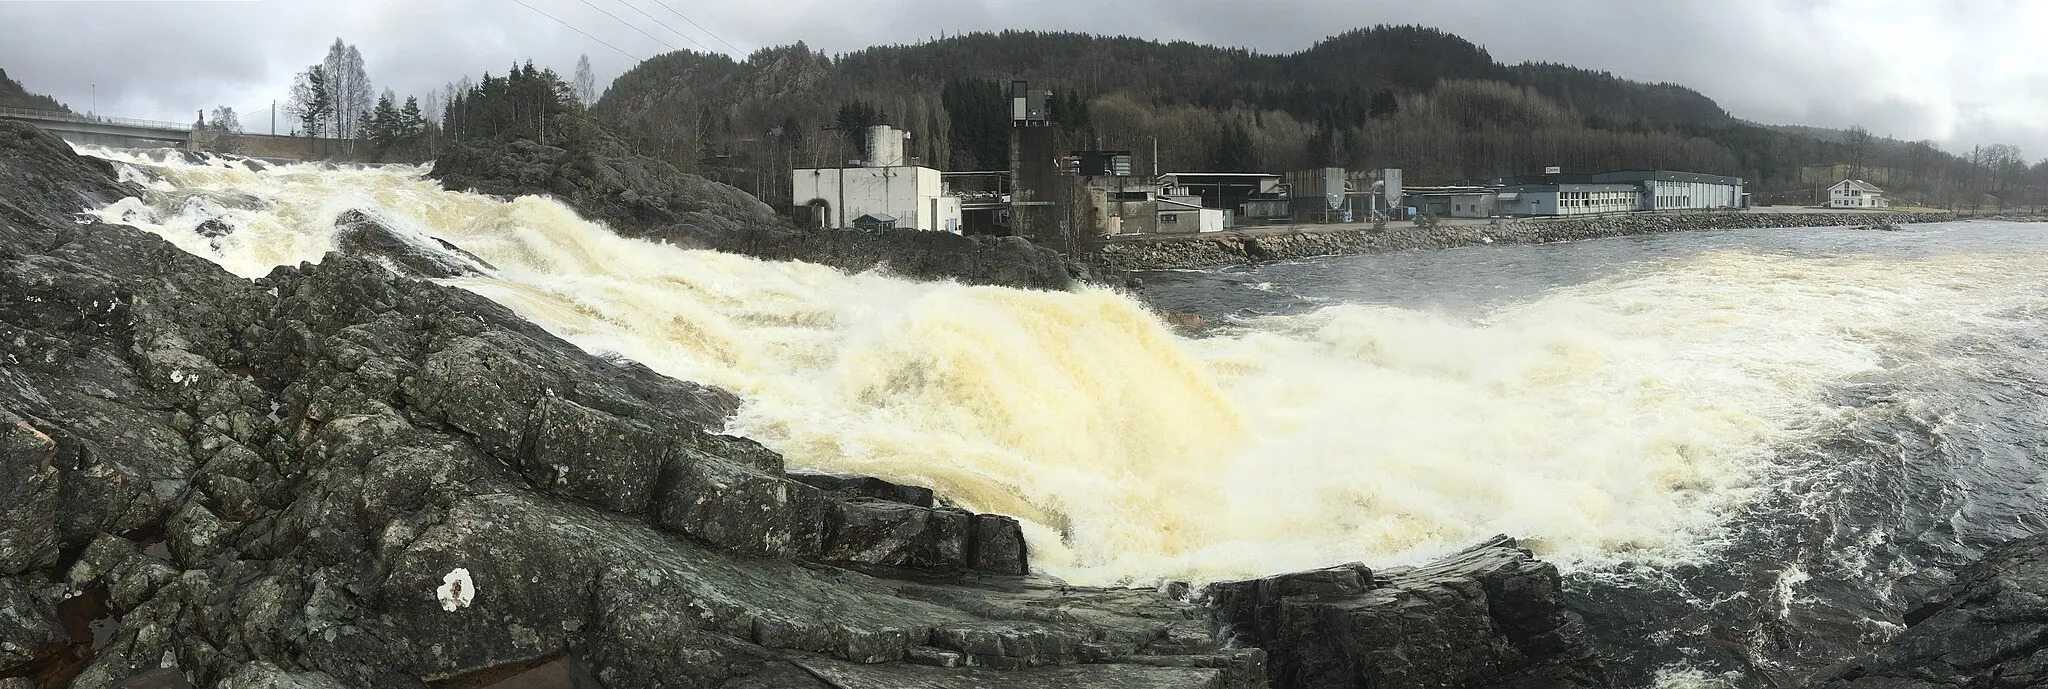 Photo showing: The Boenfoss waterfall, powering the Boen Bruk wood industry production plant. Kristiansand, Norway.